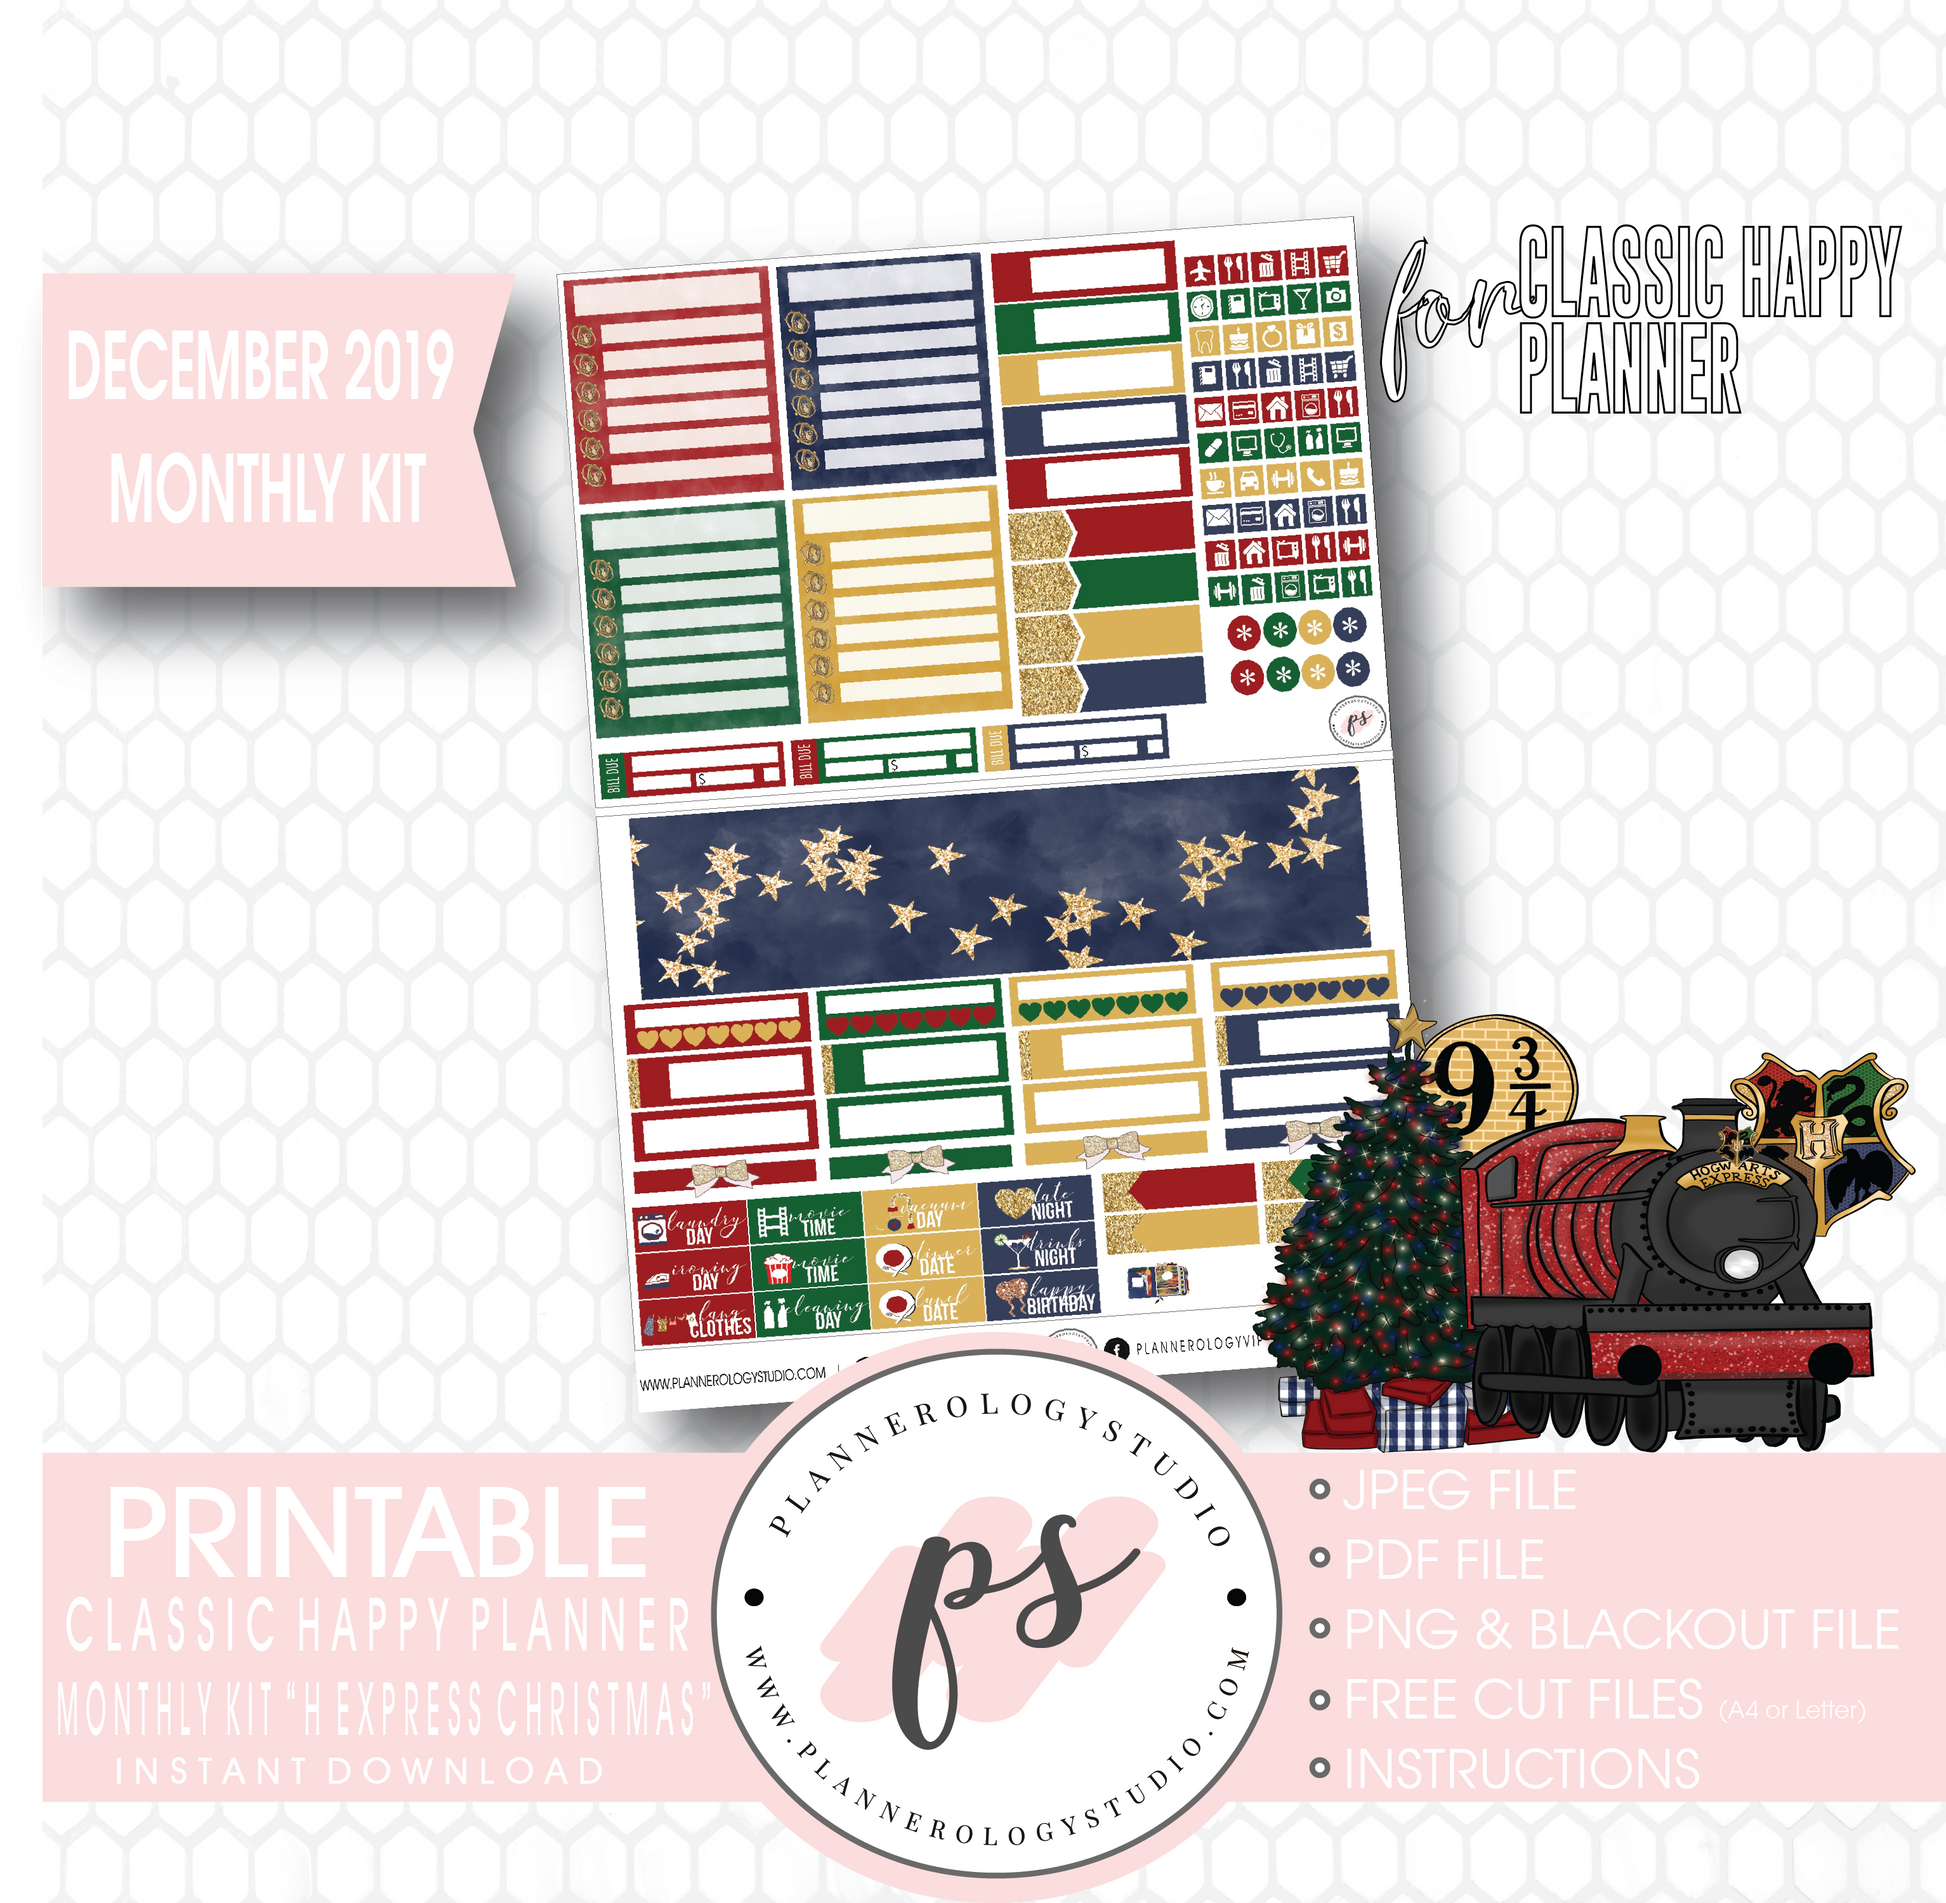 H Express Christmas (Harry Potter) Christmas December 2019 Monthly View Kit Digital Printable Planner Stickers (for use with Classic Happy Planner) - Plannerologystudio